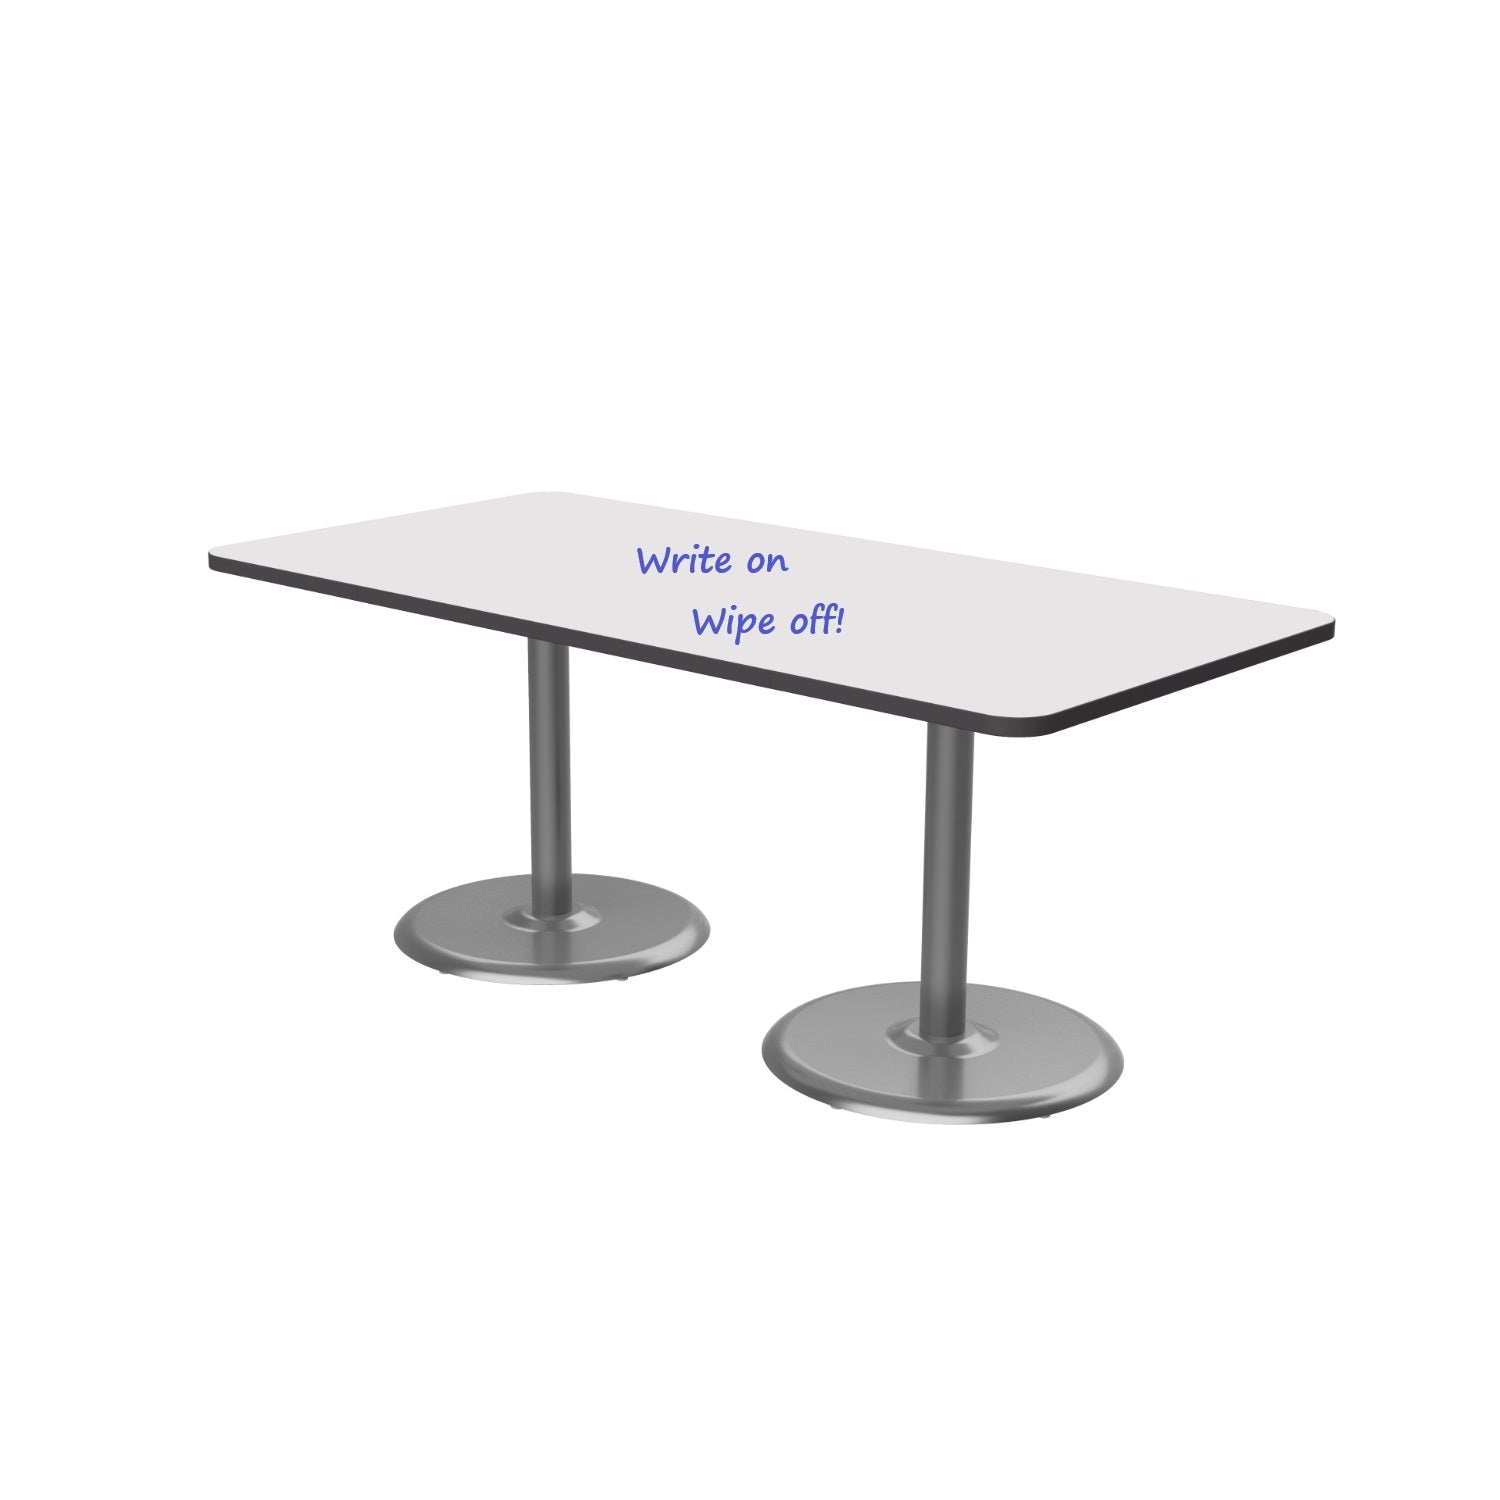 Dual Base Sitting Height 36" x 72" Rectangle Cafe Table with Dry-Erase Laminate Markerboard Top